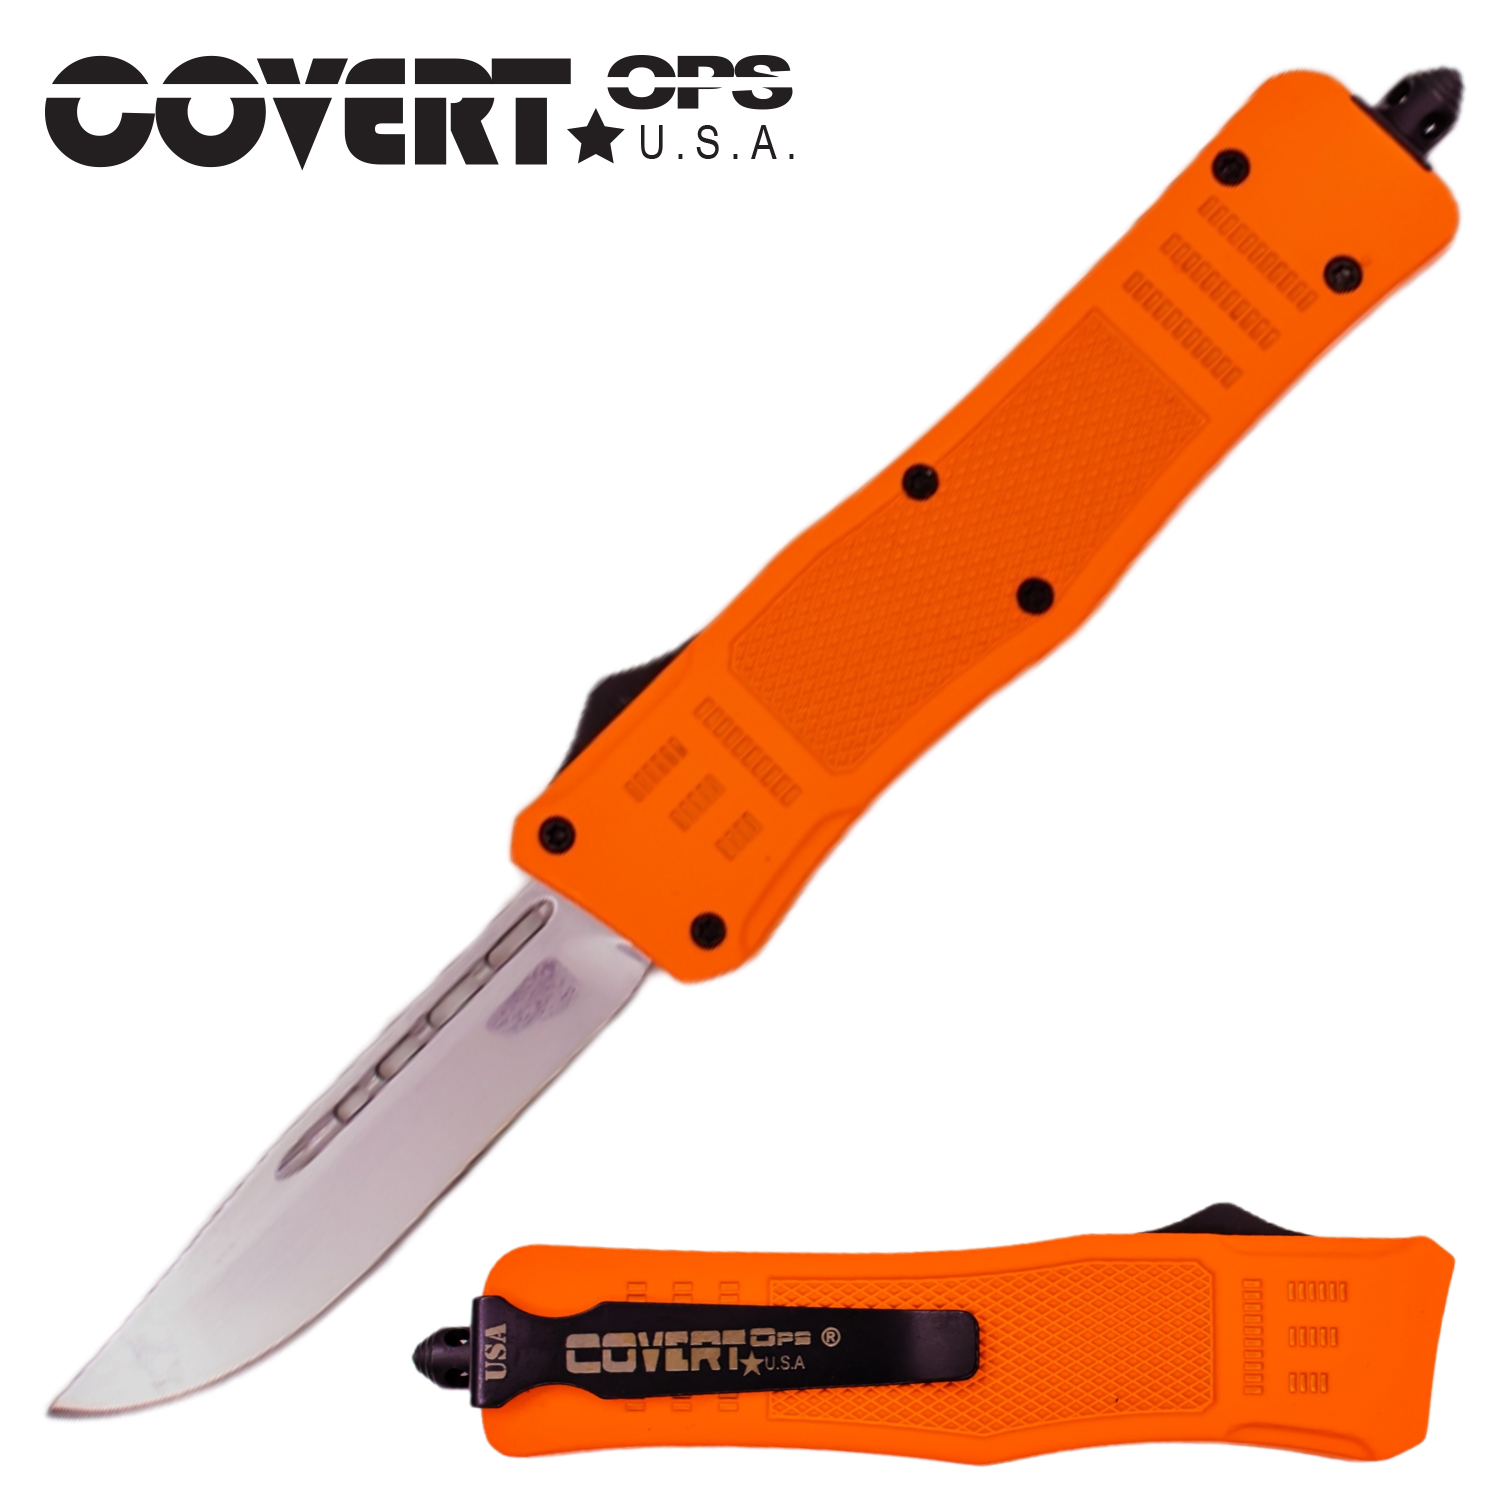 Covert OPS USA OTF Automatic Knife 8 Inch Orange Handle DP